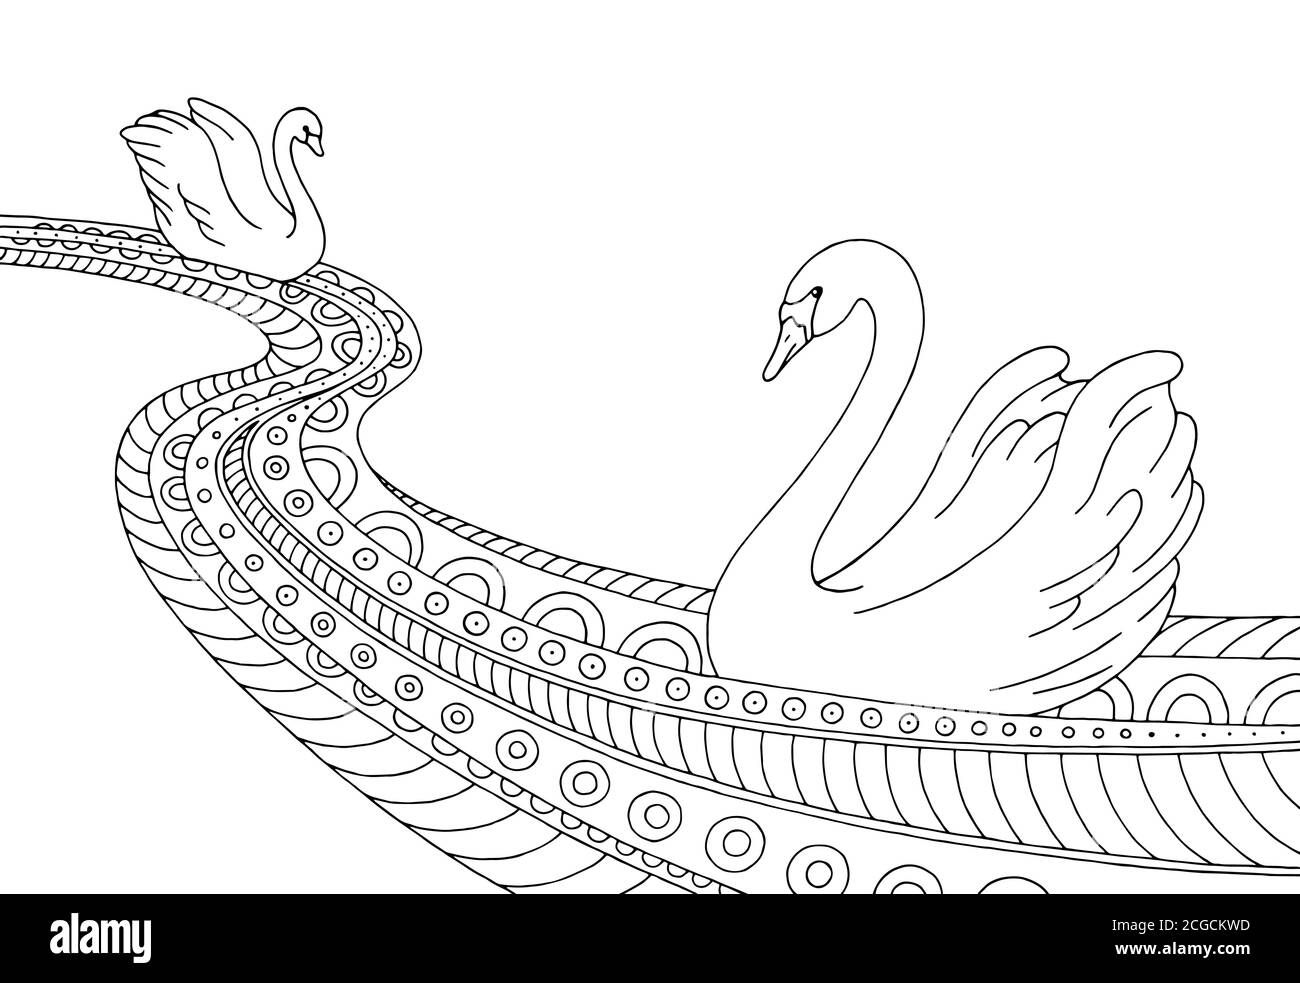 River swan black white graphic abstract doodle pattern sketch illustration vector Stock Vector